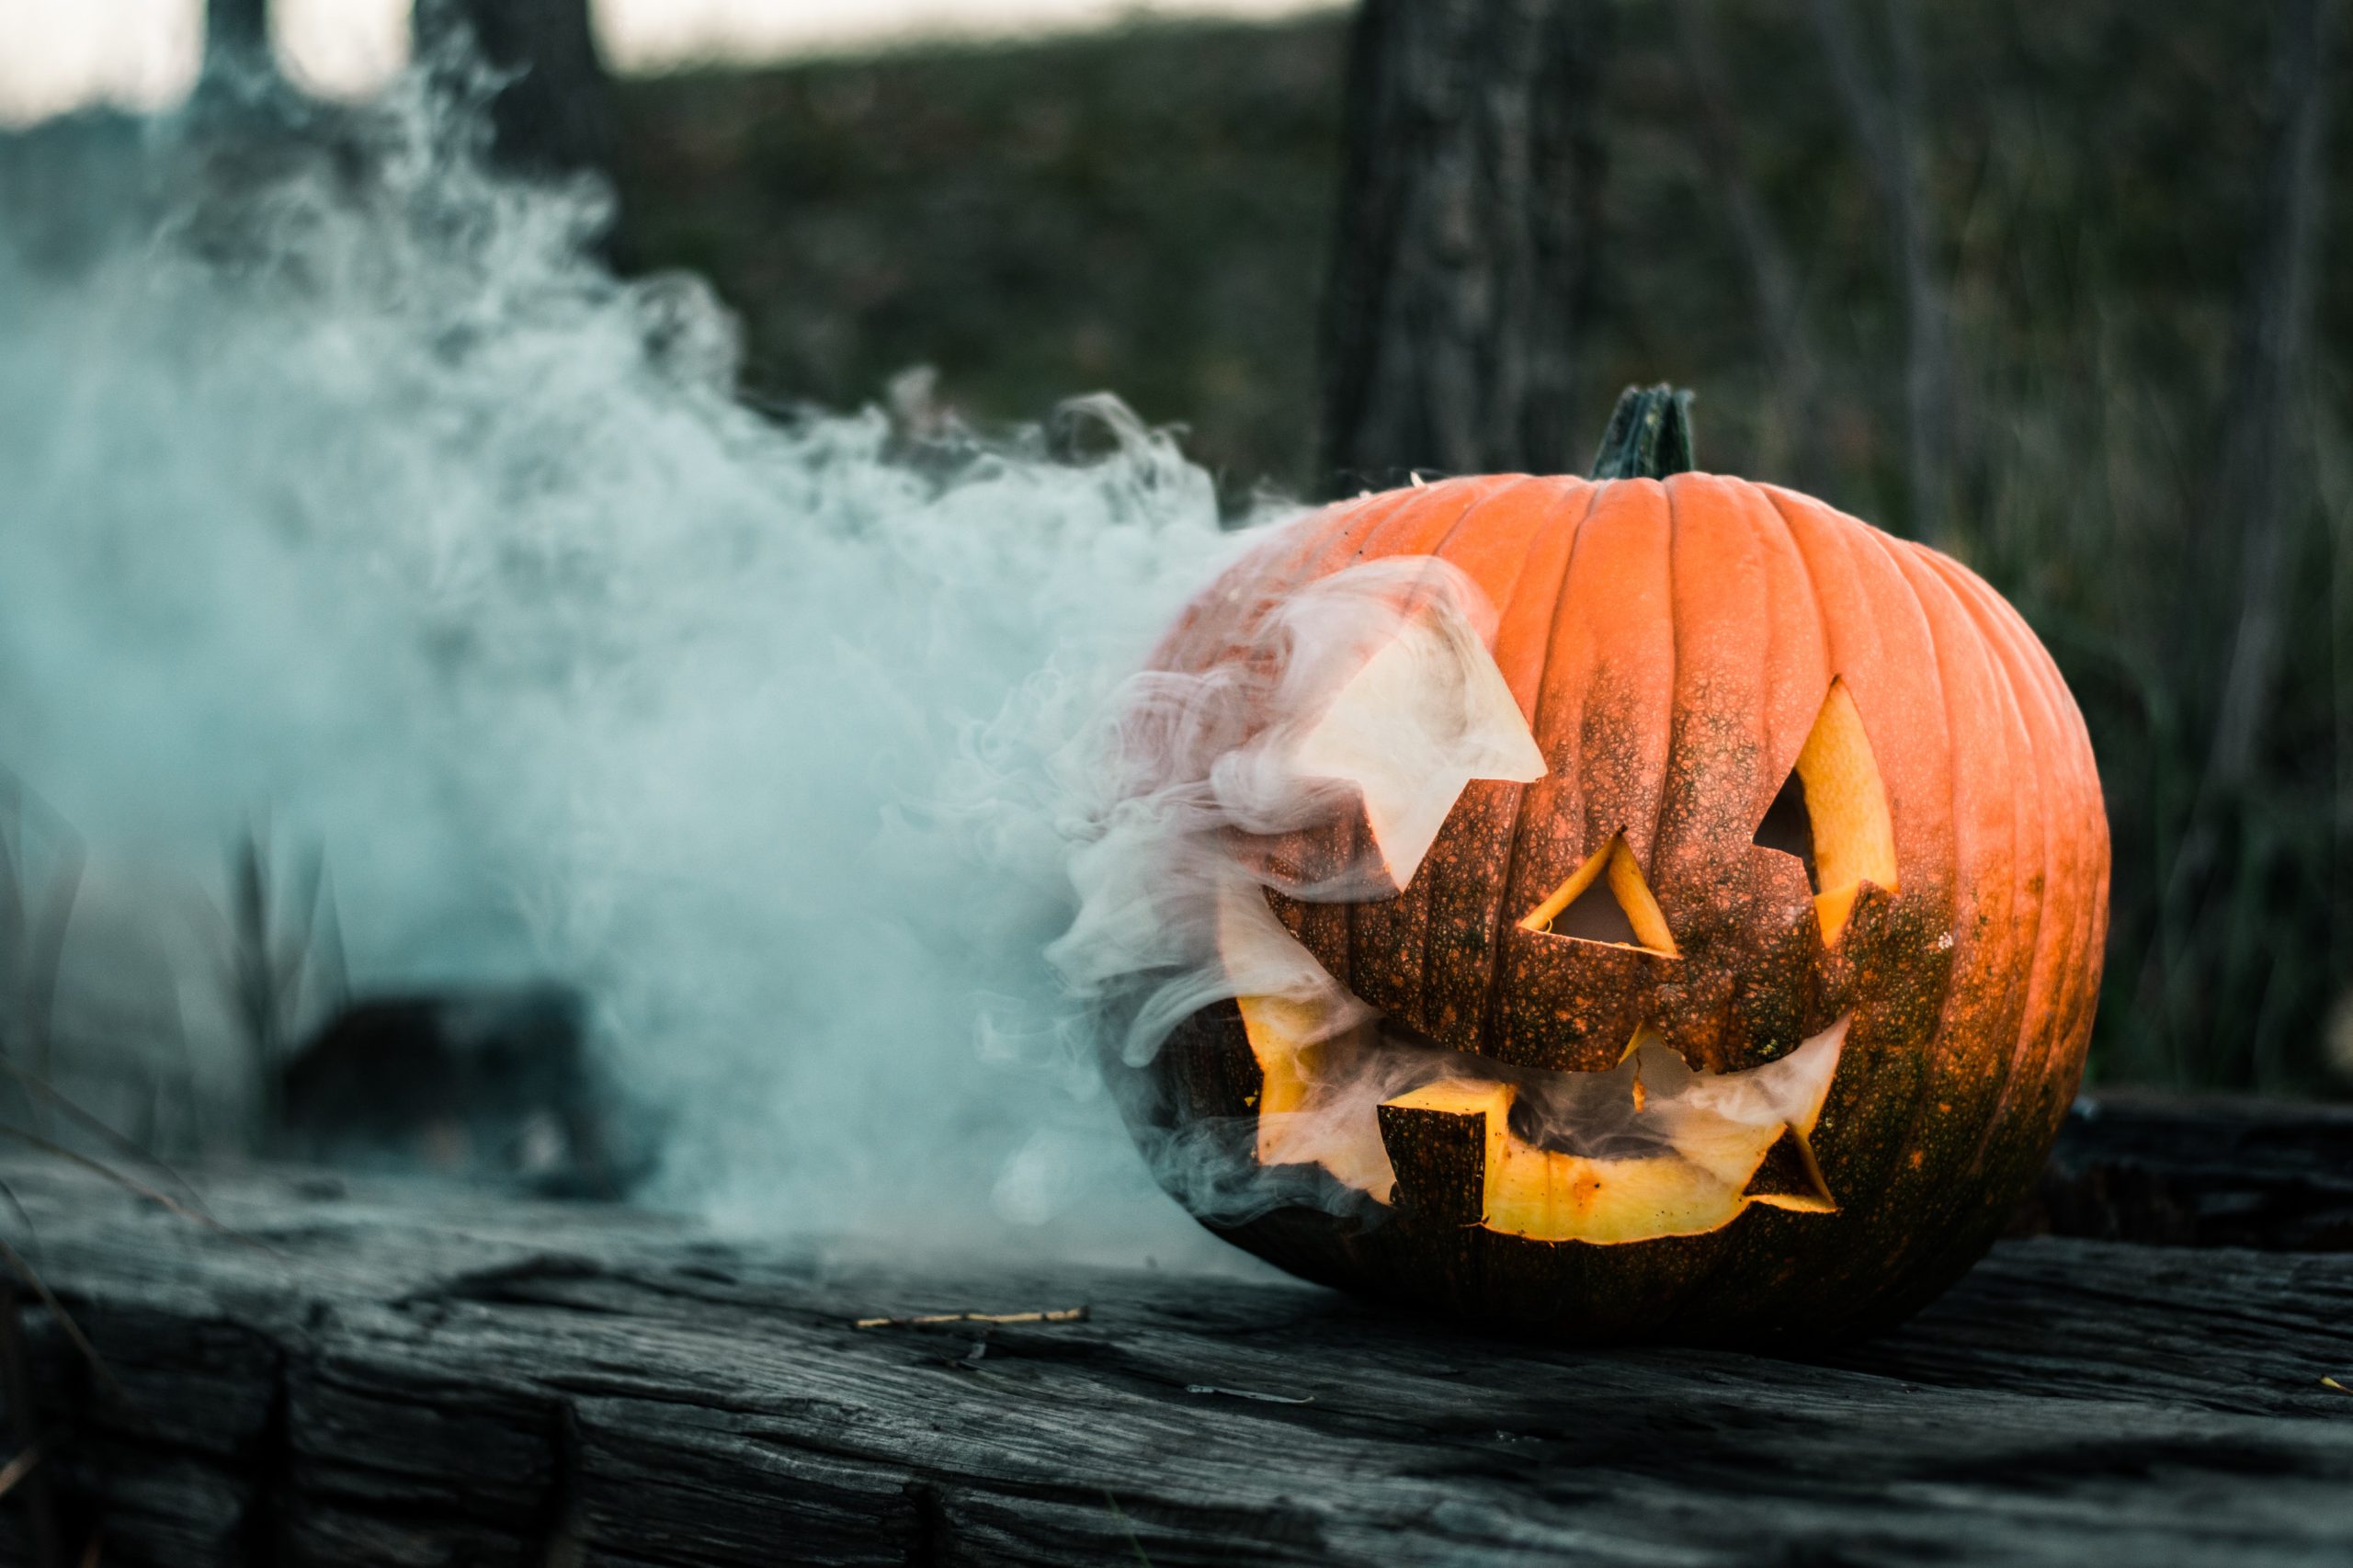 a carved pumpkin with smoke coming out of the holes